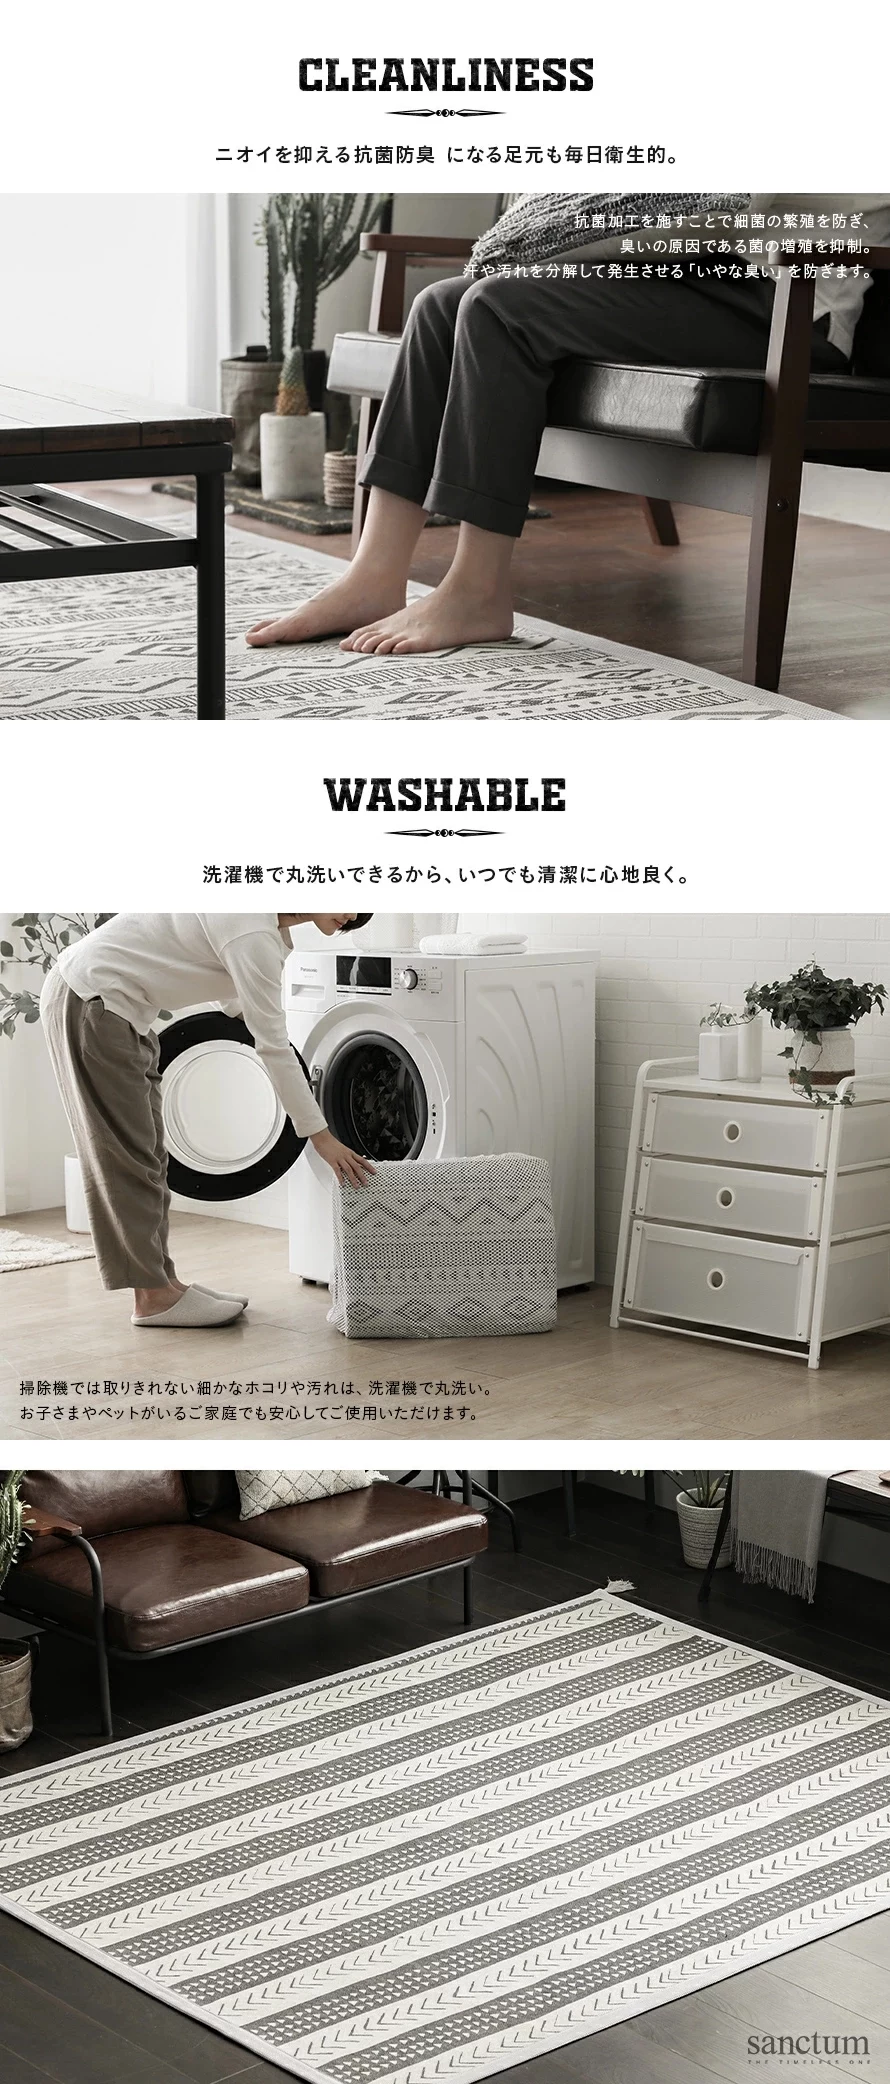 CLEANLINESS、WASHABLE